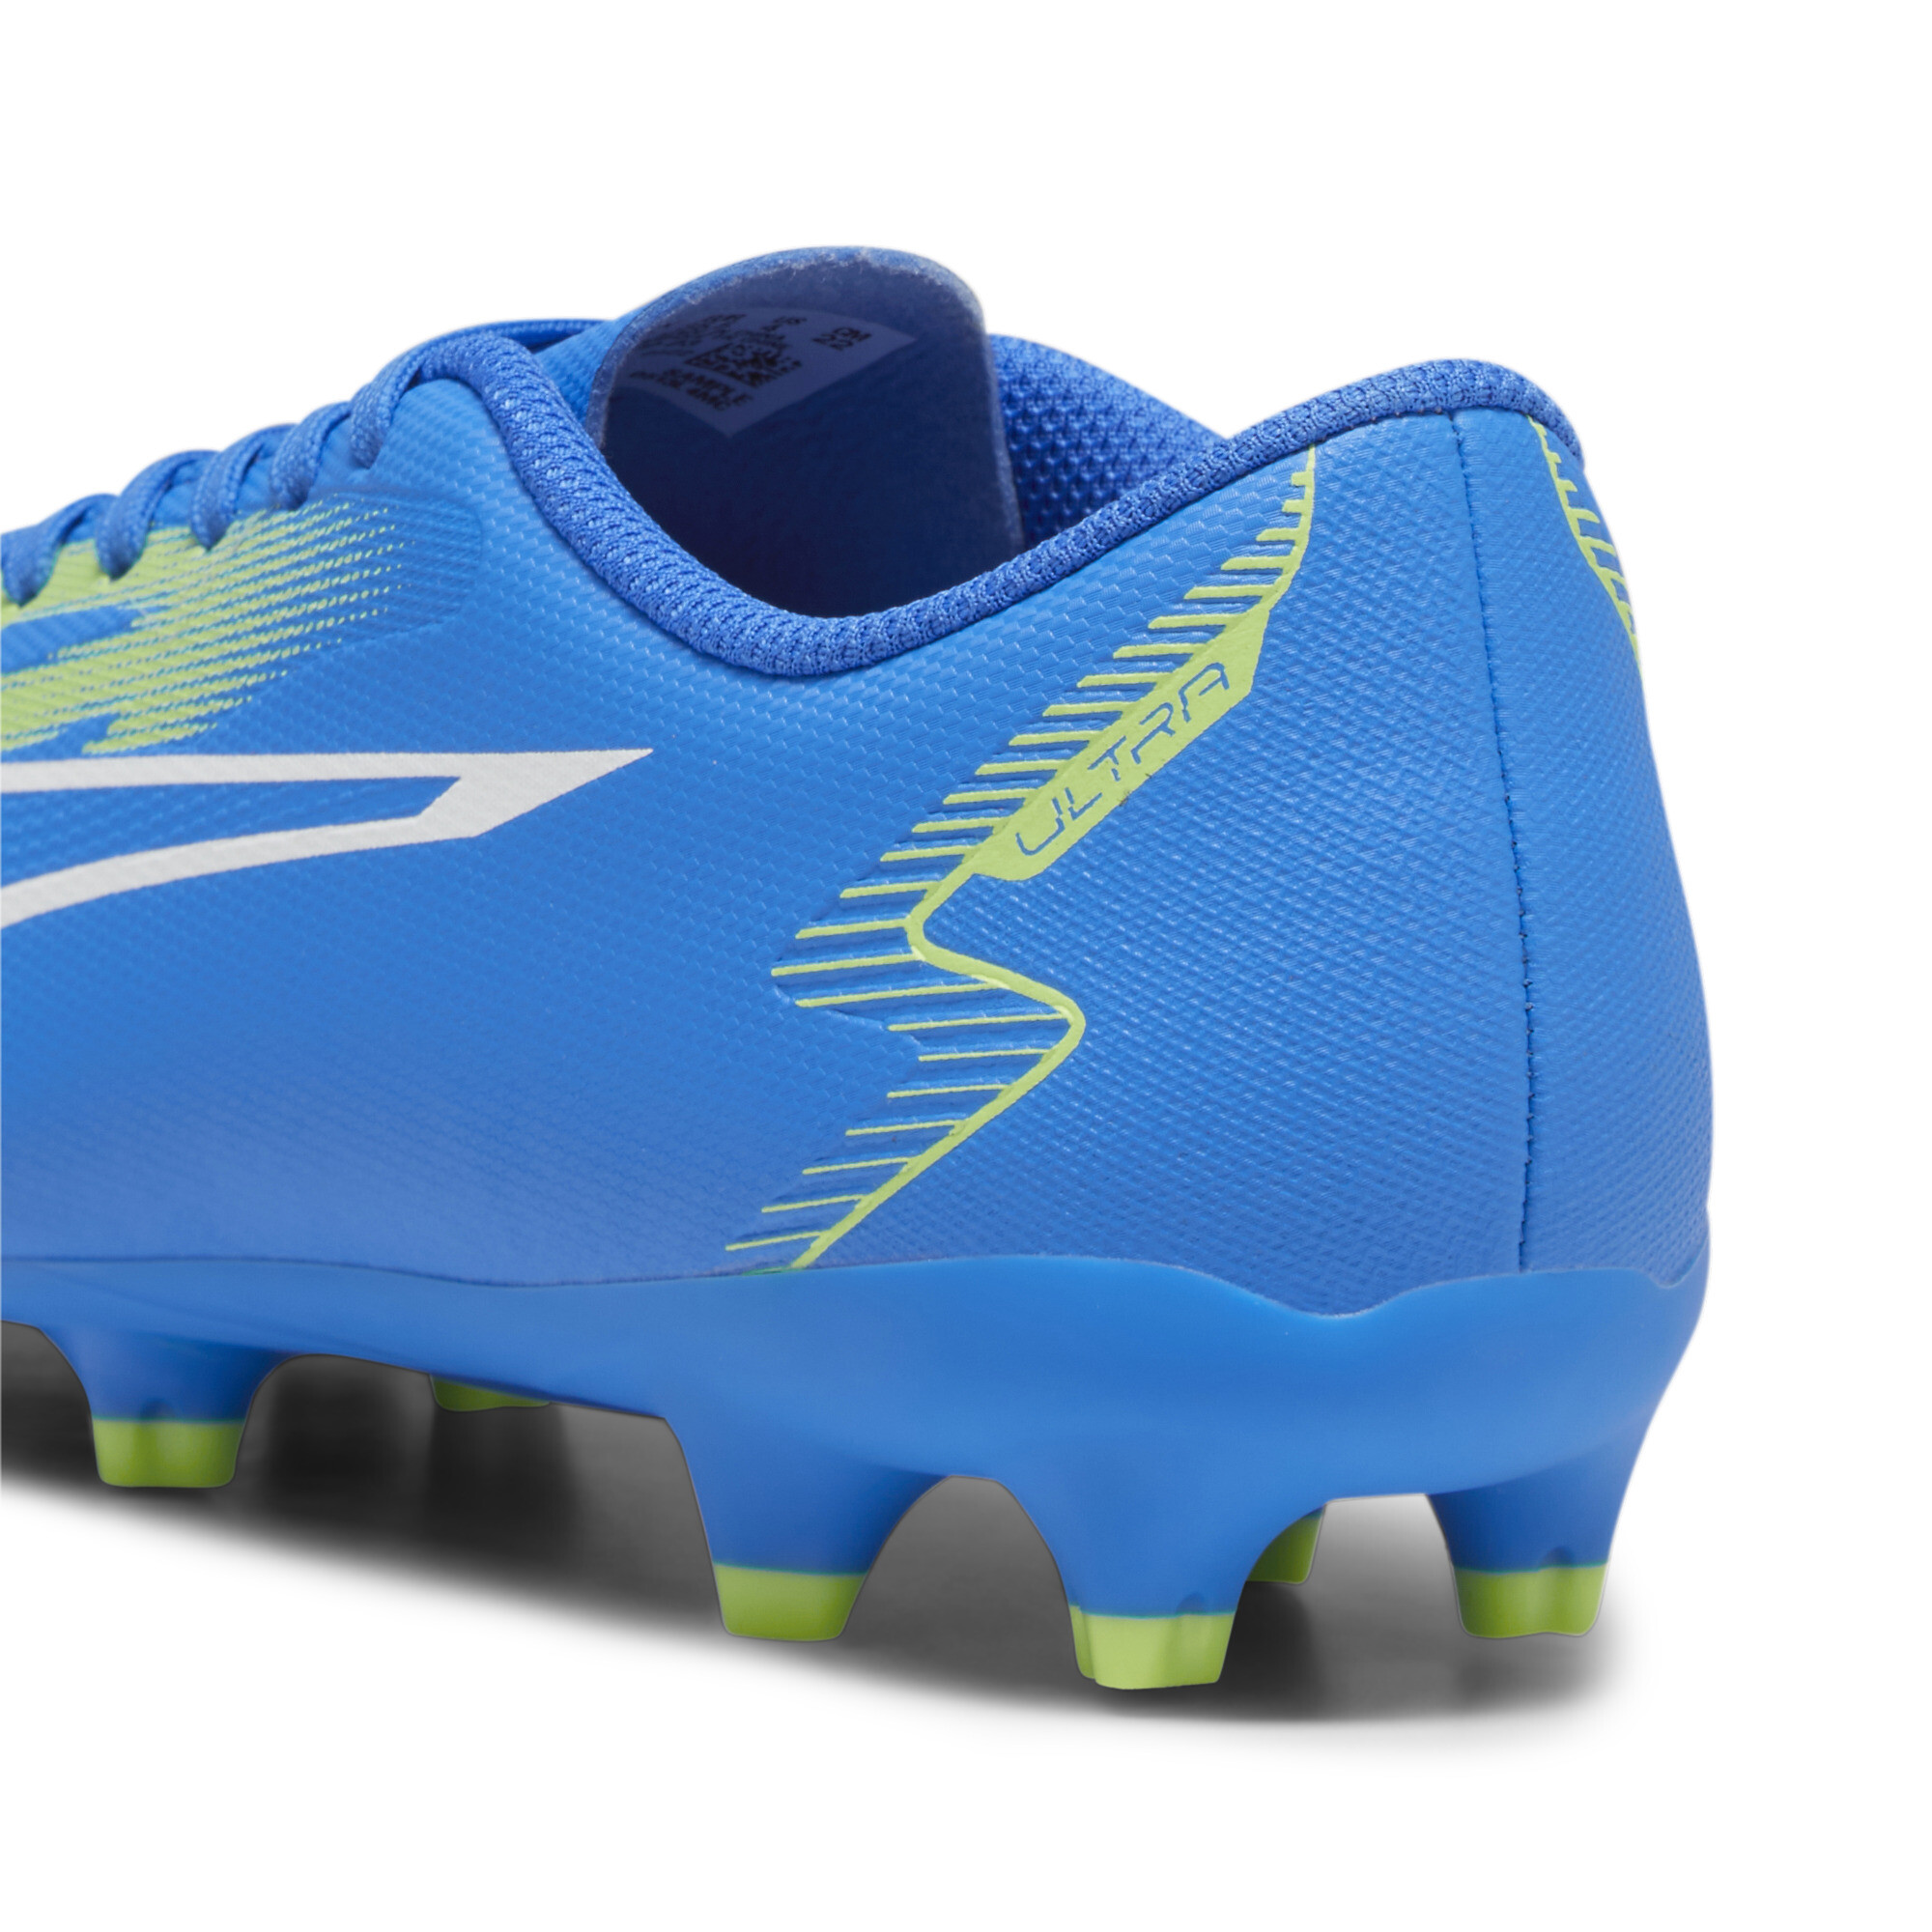 PUMA ULTRA PLAY FG/AG Youth Football Boots In Blue, Size EU 29